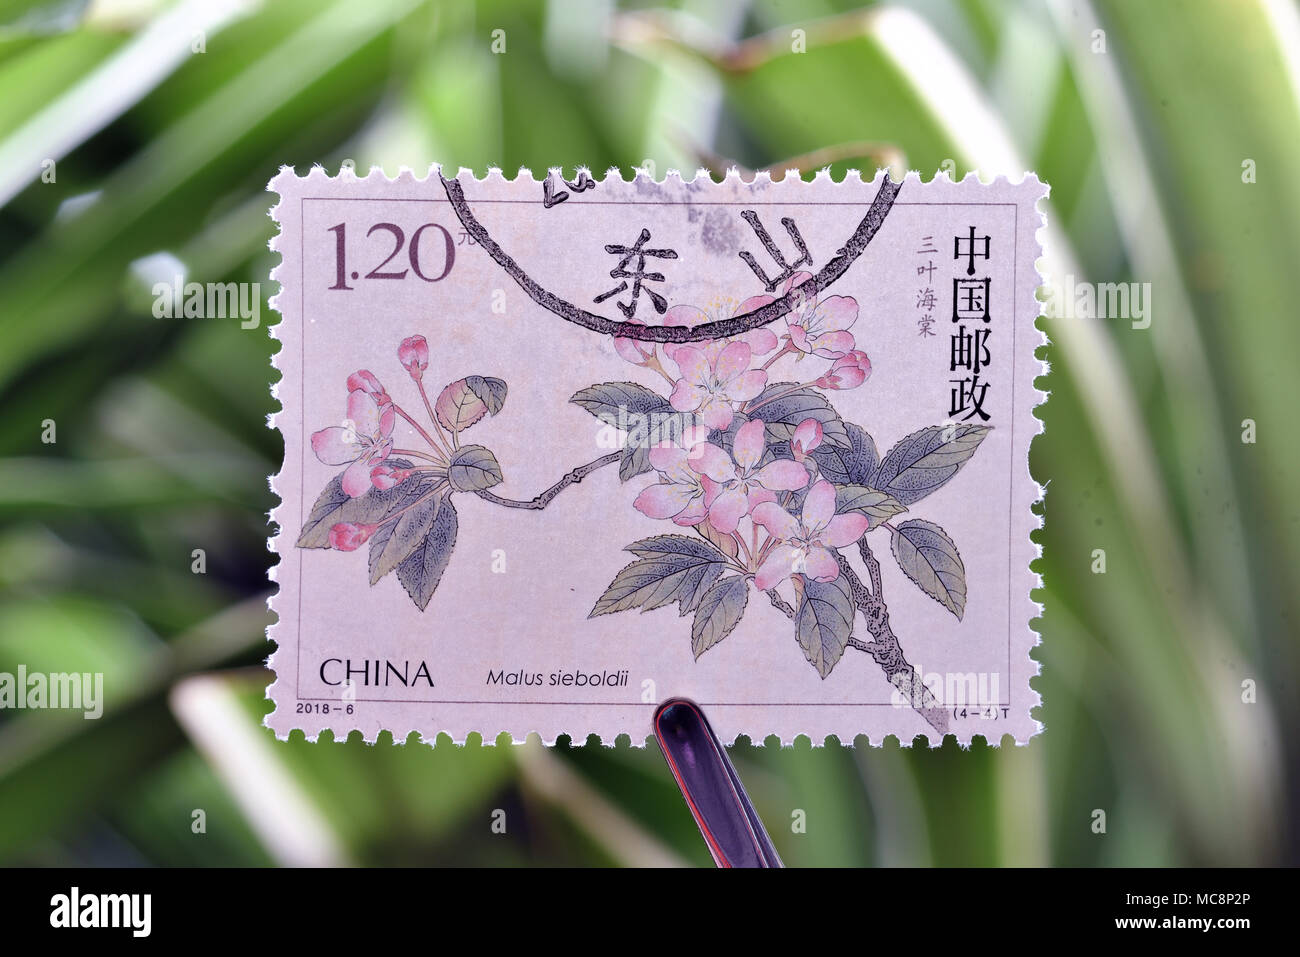 CHINA - CIRCA 2018: A stamps printed in China shows 2018-6 Chinese Flowering Crabapple  (4-4), Sanye Haitang (Malus Sieboldii), 120 fen, 40 * 30 mm, c Stock Photo